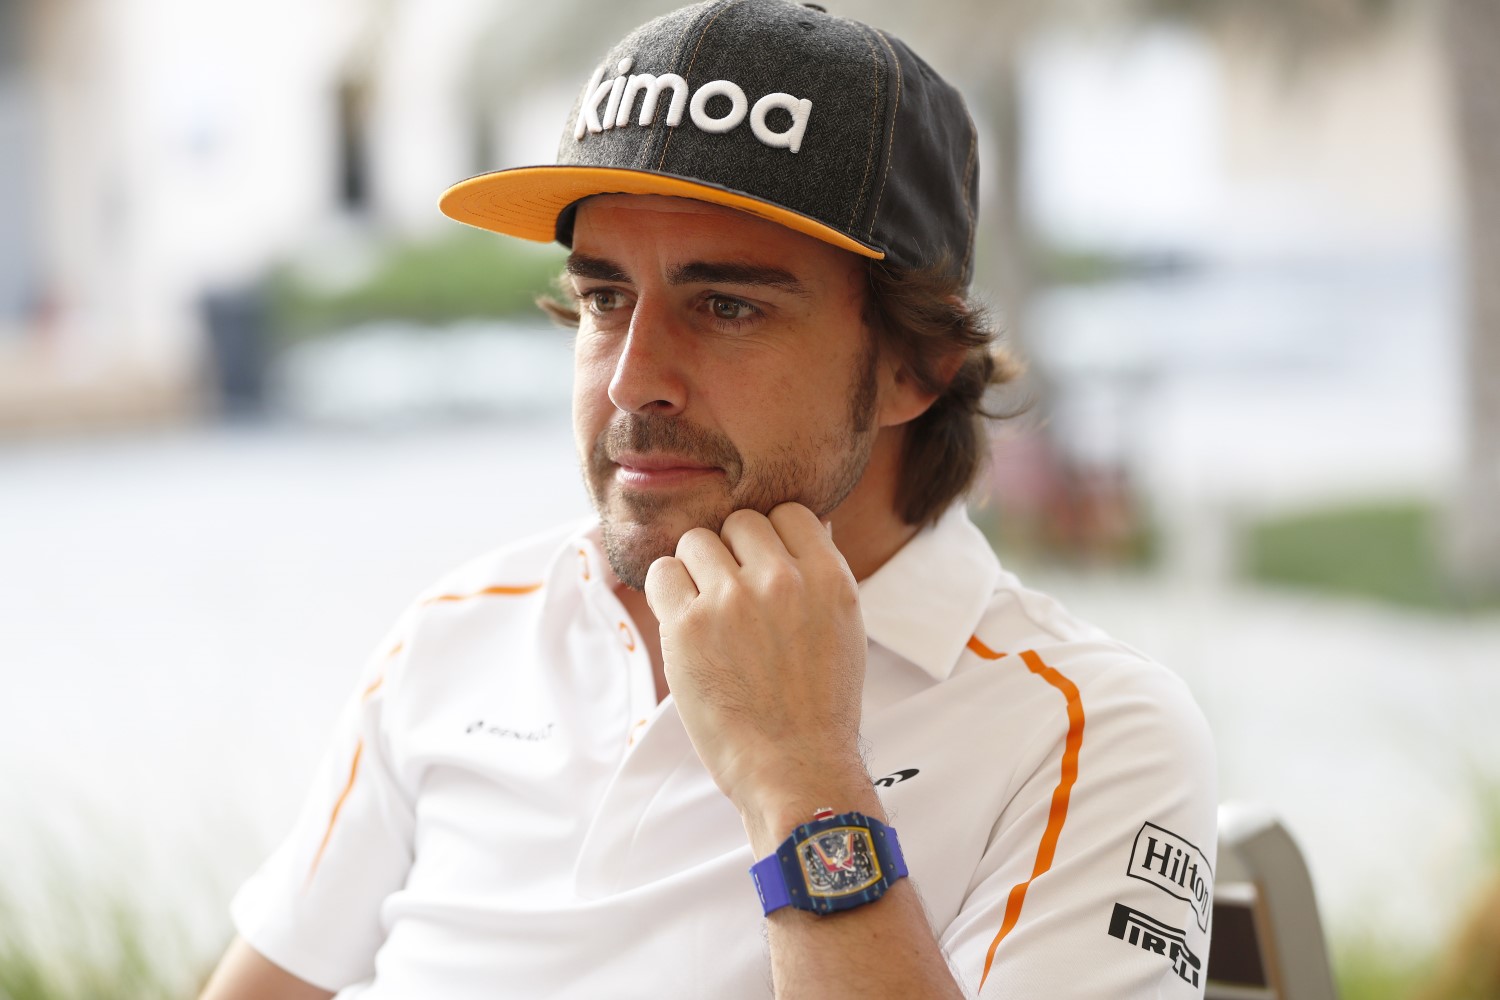 Go-Kart and endurance racing more important than IndyCar for Alonso